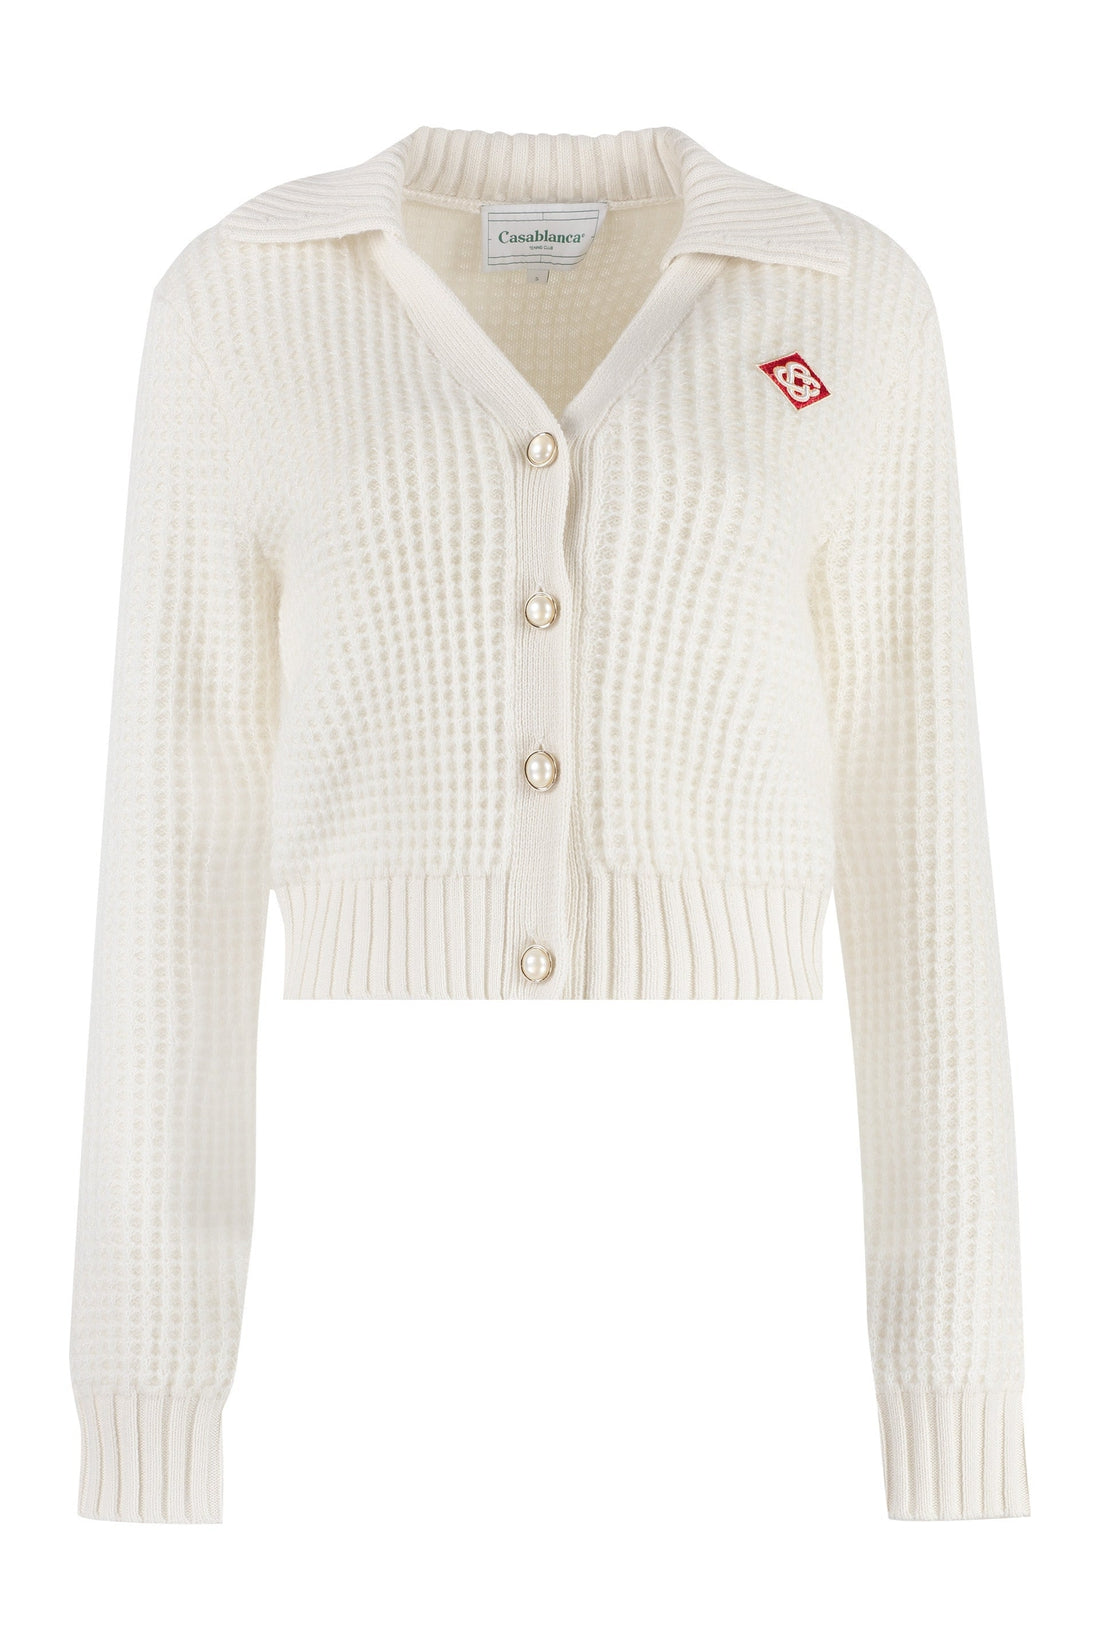 Casablanca-OUTLET-SALE-Wool and cashmere cardigan-ARCHIVIST